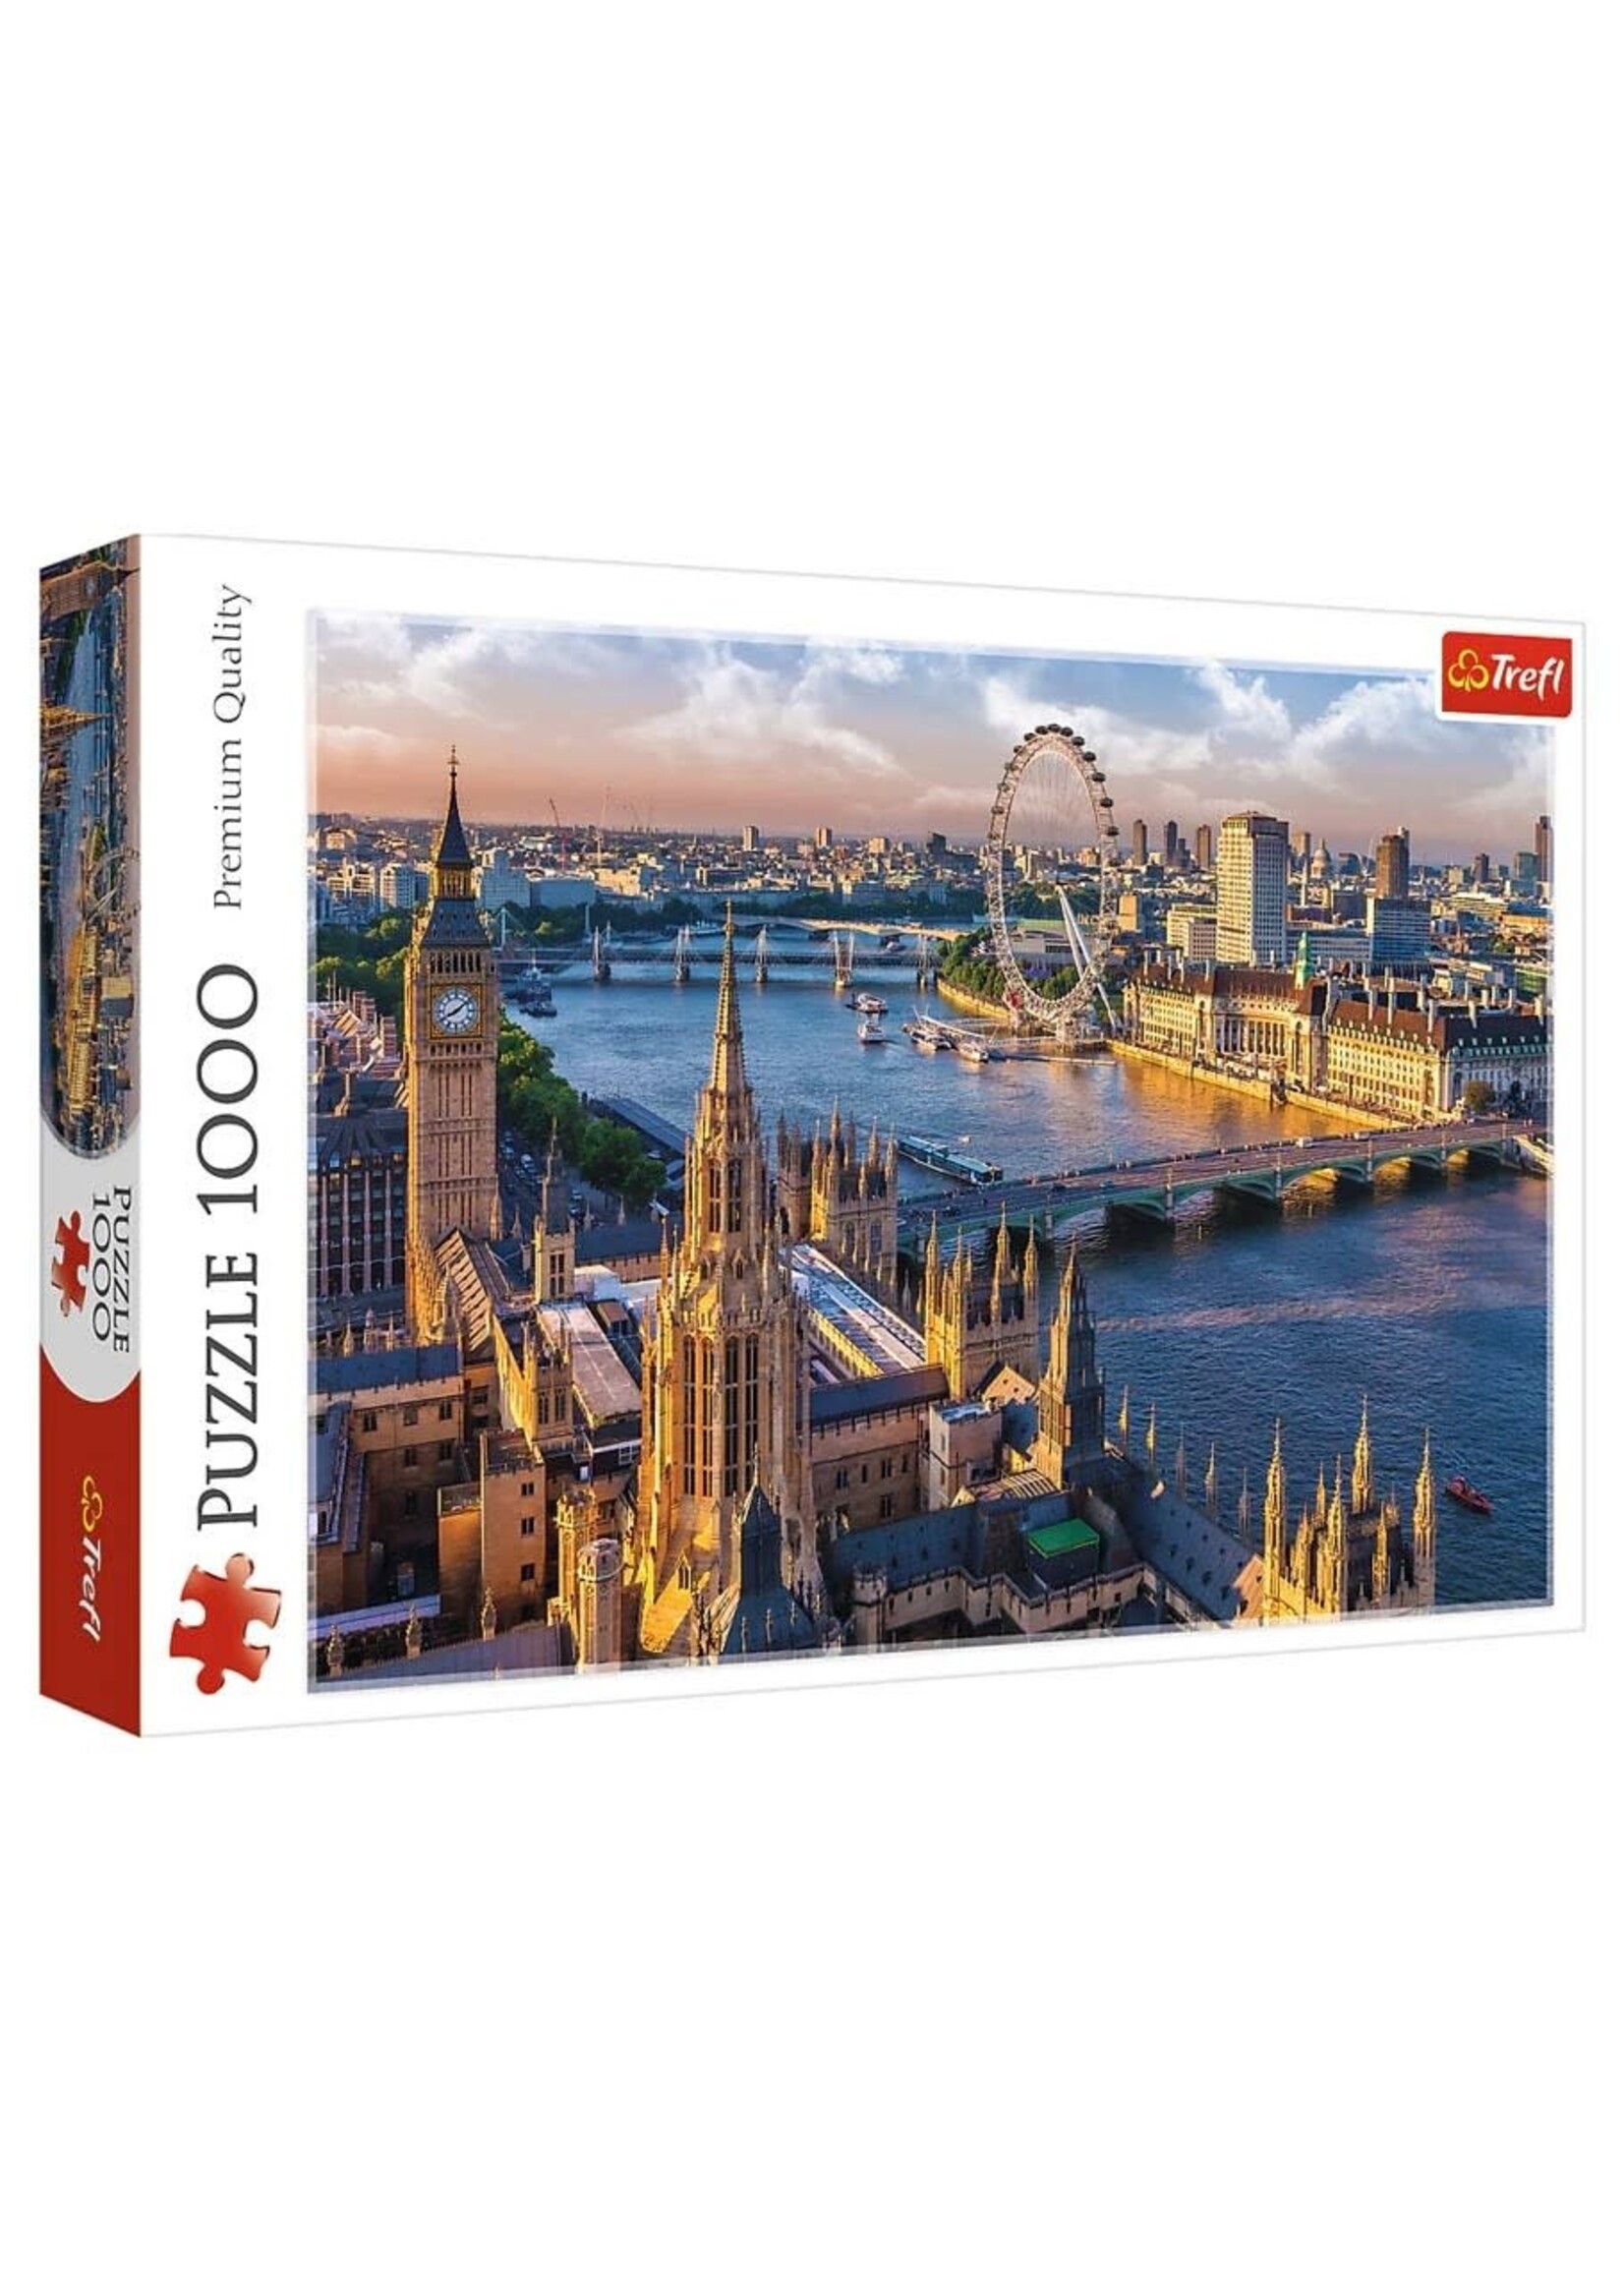 Trefl Puzzle: London/Getty Images 1000pc